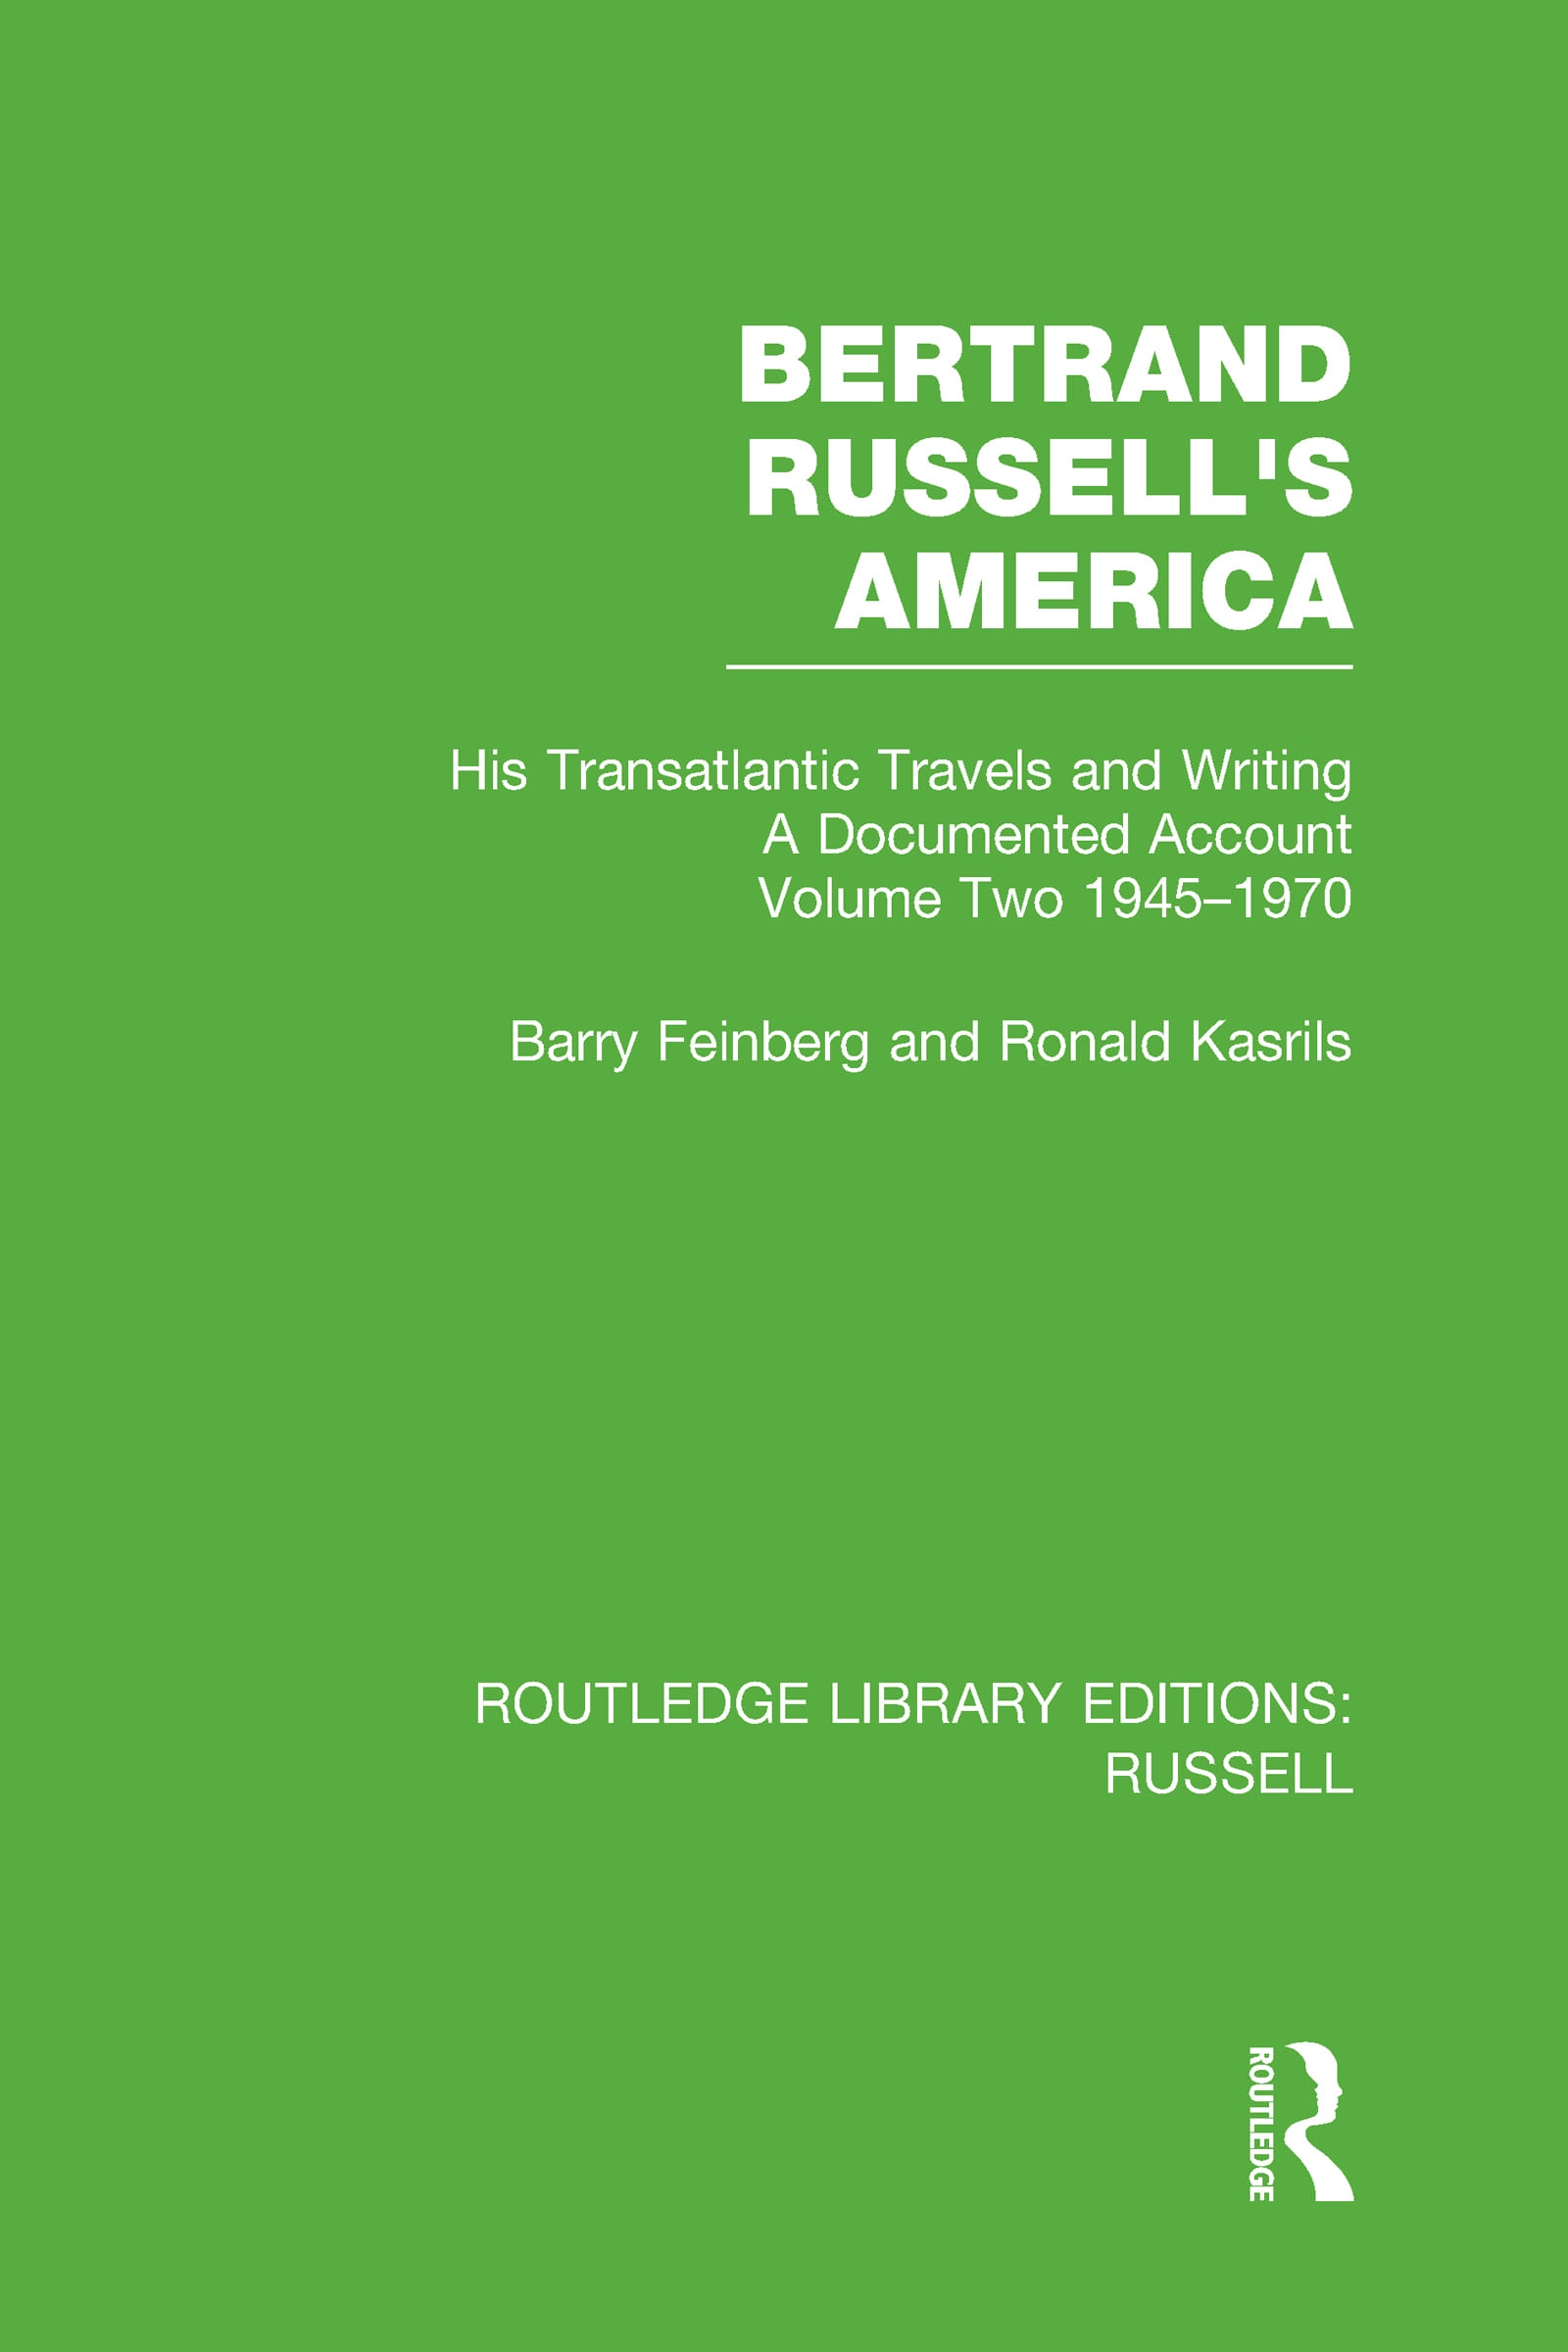 Bertrand Russell’s America: His Transatlantic Travels and Writings A Documented Account: 1945-1970